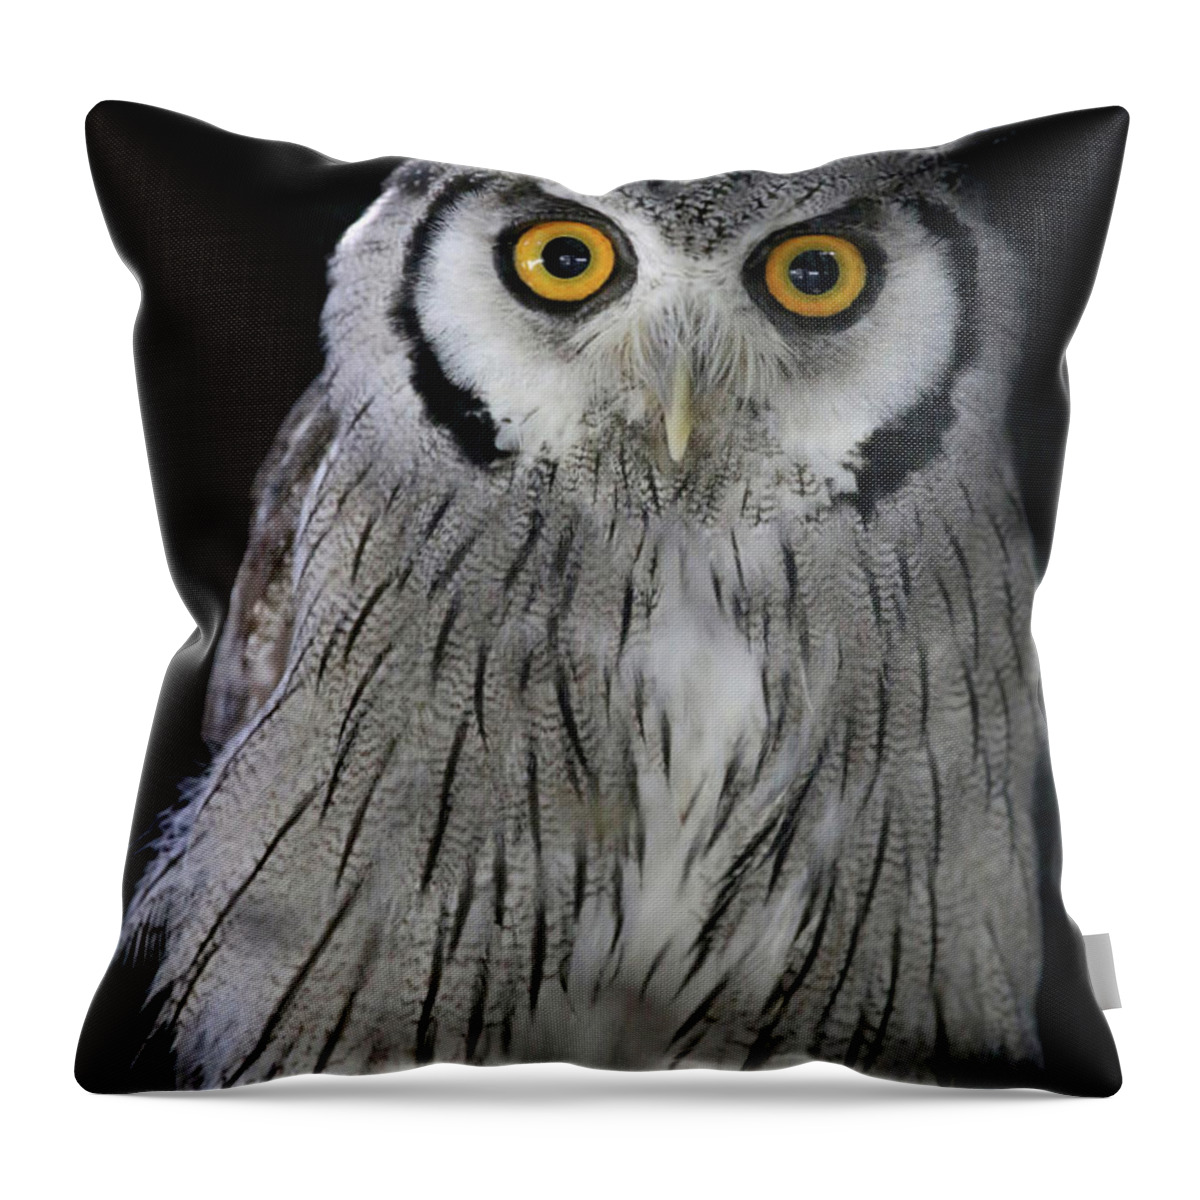 Owl Throw Pillow featuring the photograph Who 'Dat? by Steve Parr